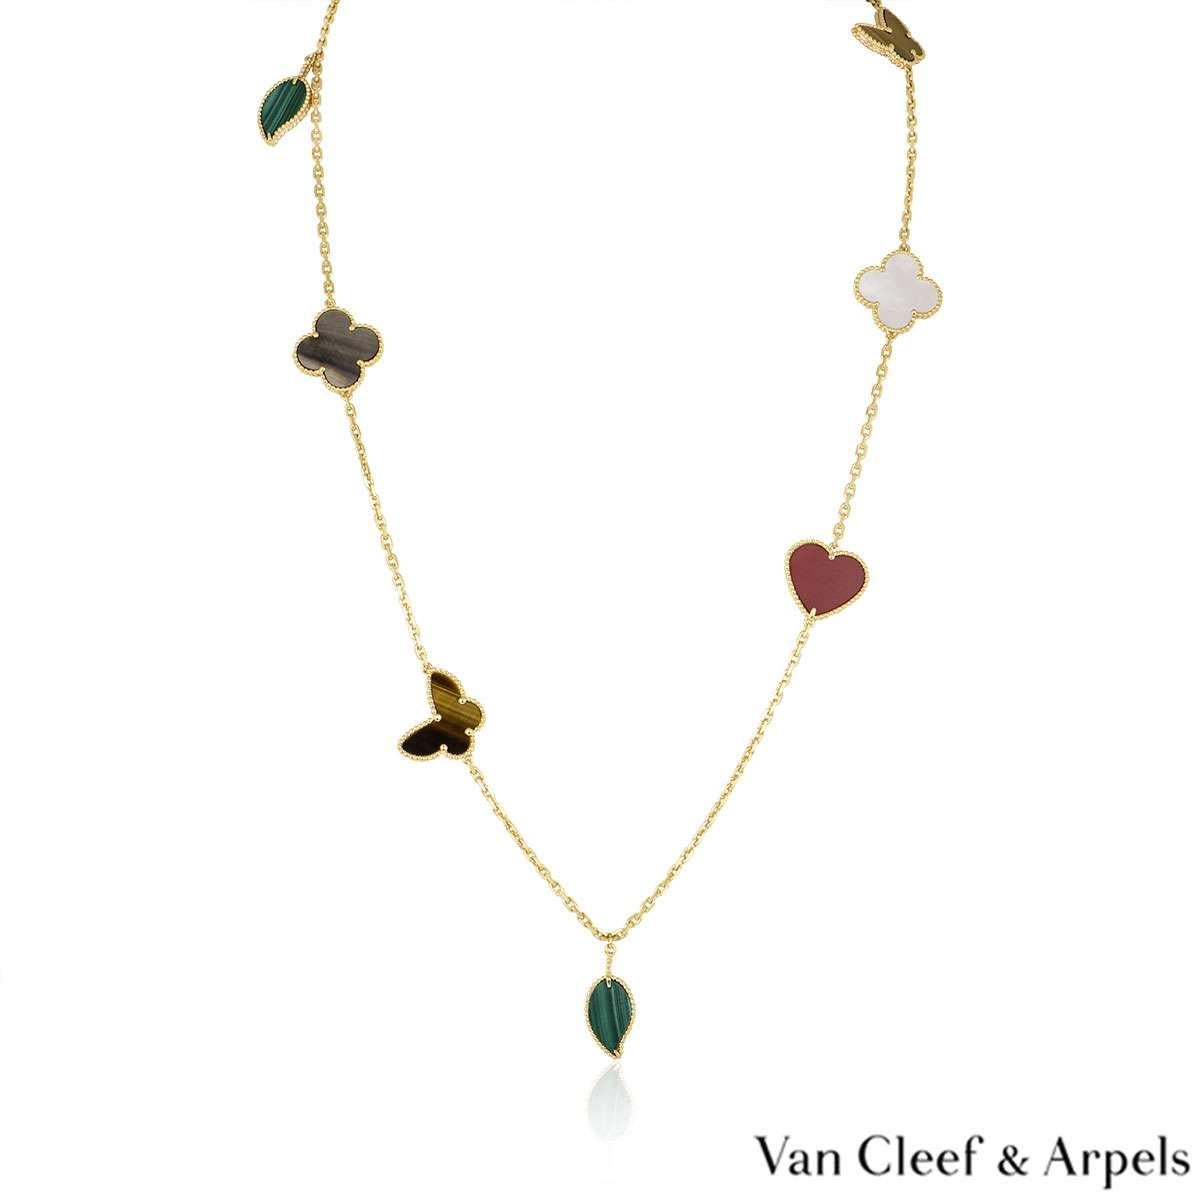 A beautiful 18k yellow gold Lucky Alhambra long necklace by Van Cleef & Arpels. The necklace features 12 motifs, with a mixture of symbols such as hearts, butterflies, leaves and clovers. The motifs are set with carnelian, tiger's eye, white & grey